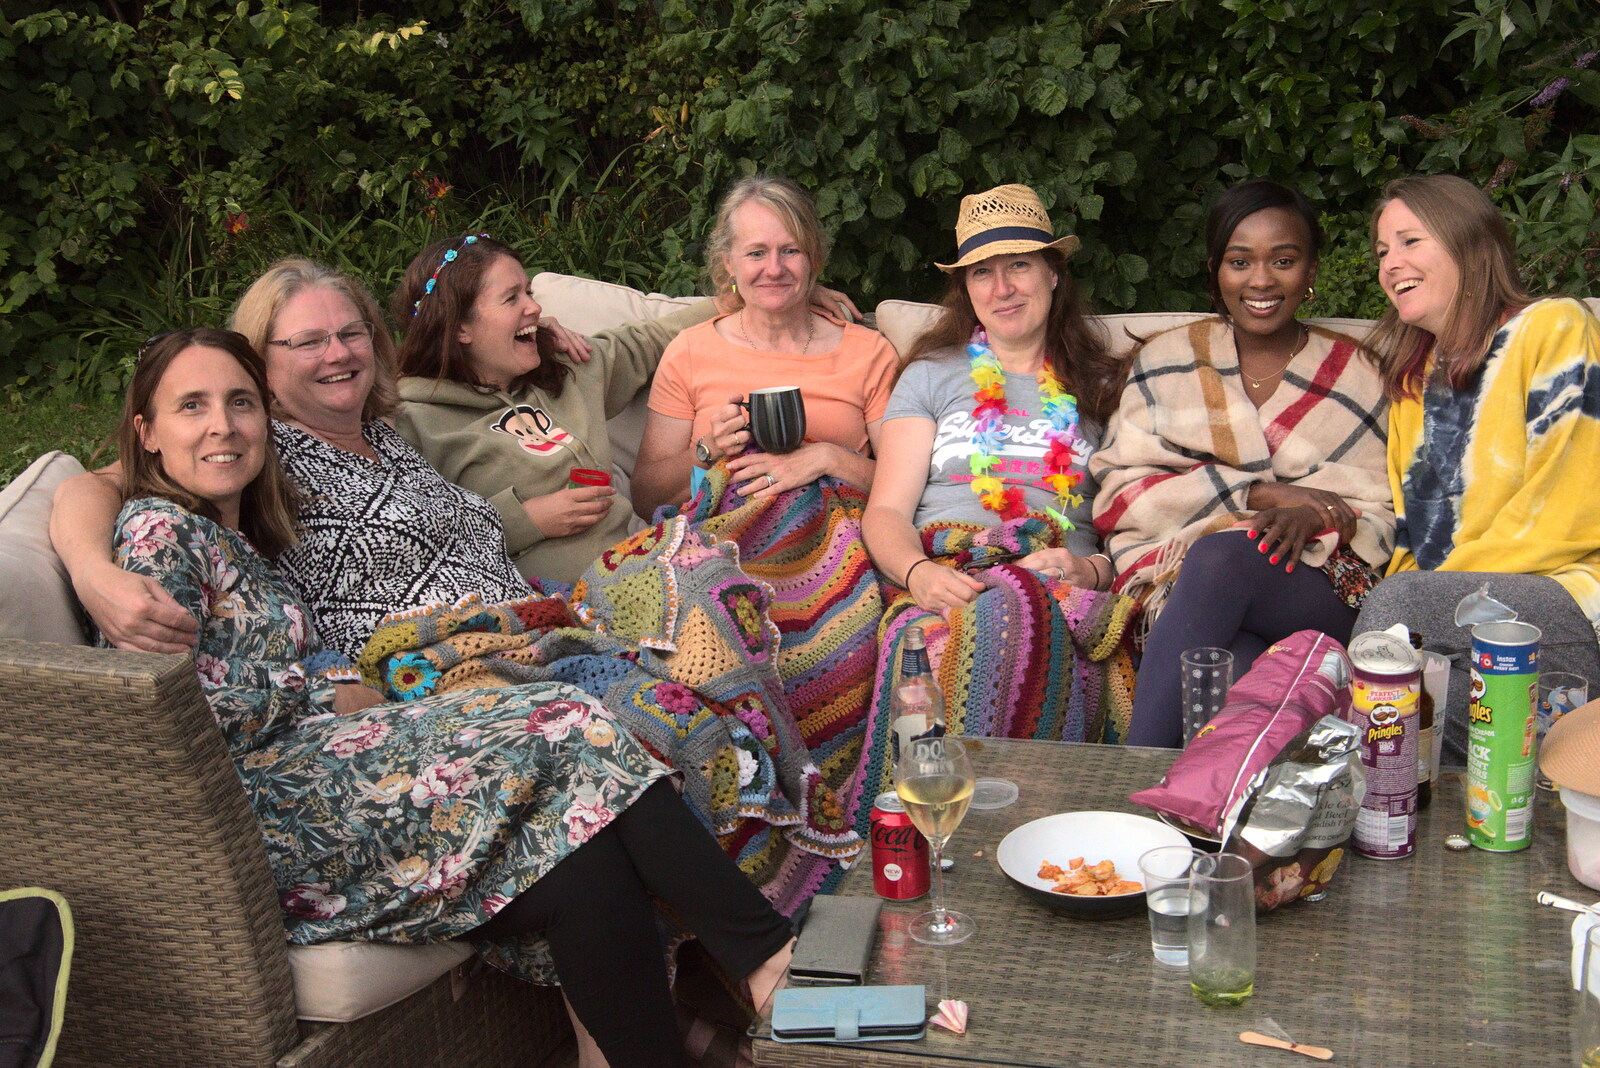 A group photo of the girls from Meg-fest, and Sean Visits, Bressingham and Brome, Suffolk - 1st August 2021